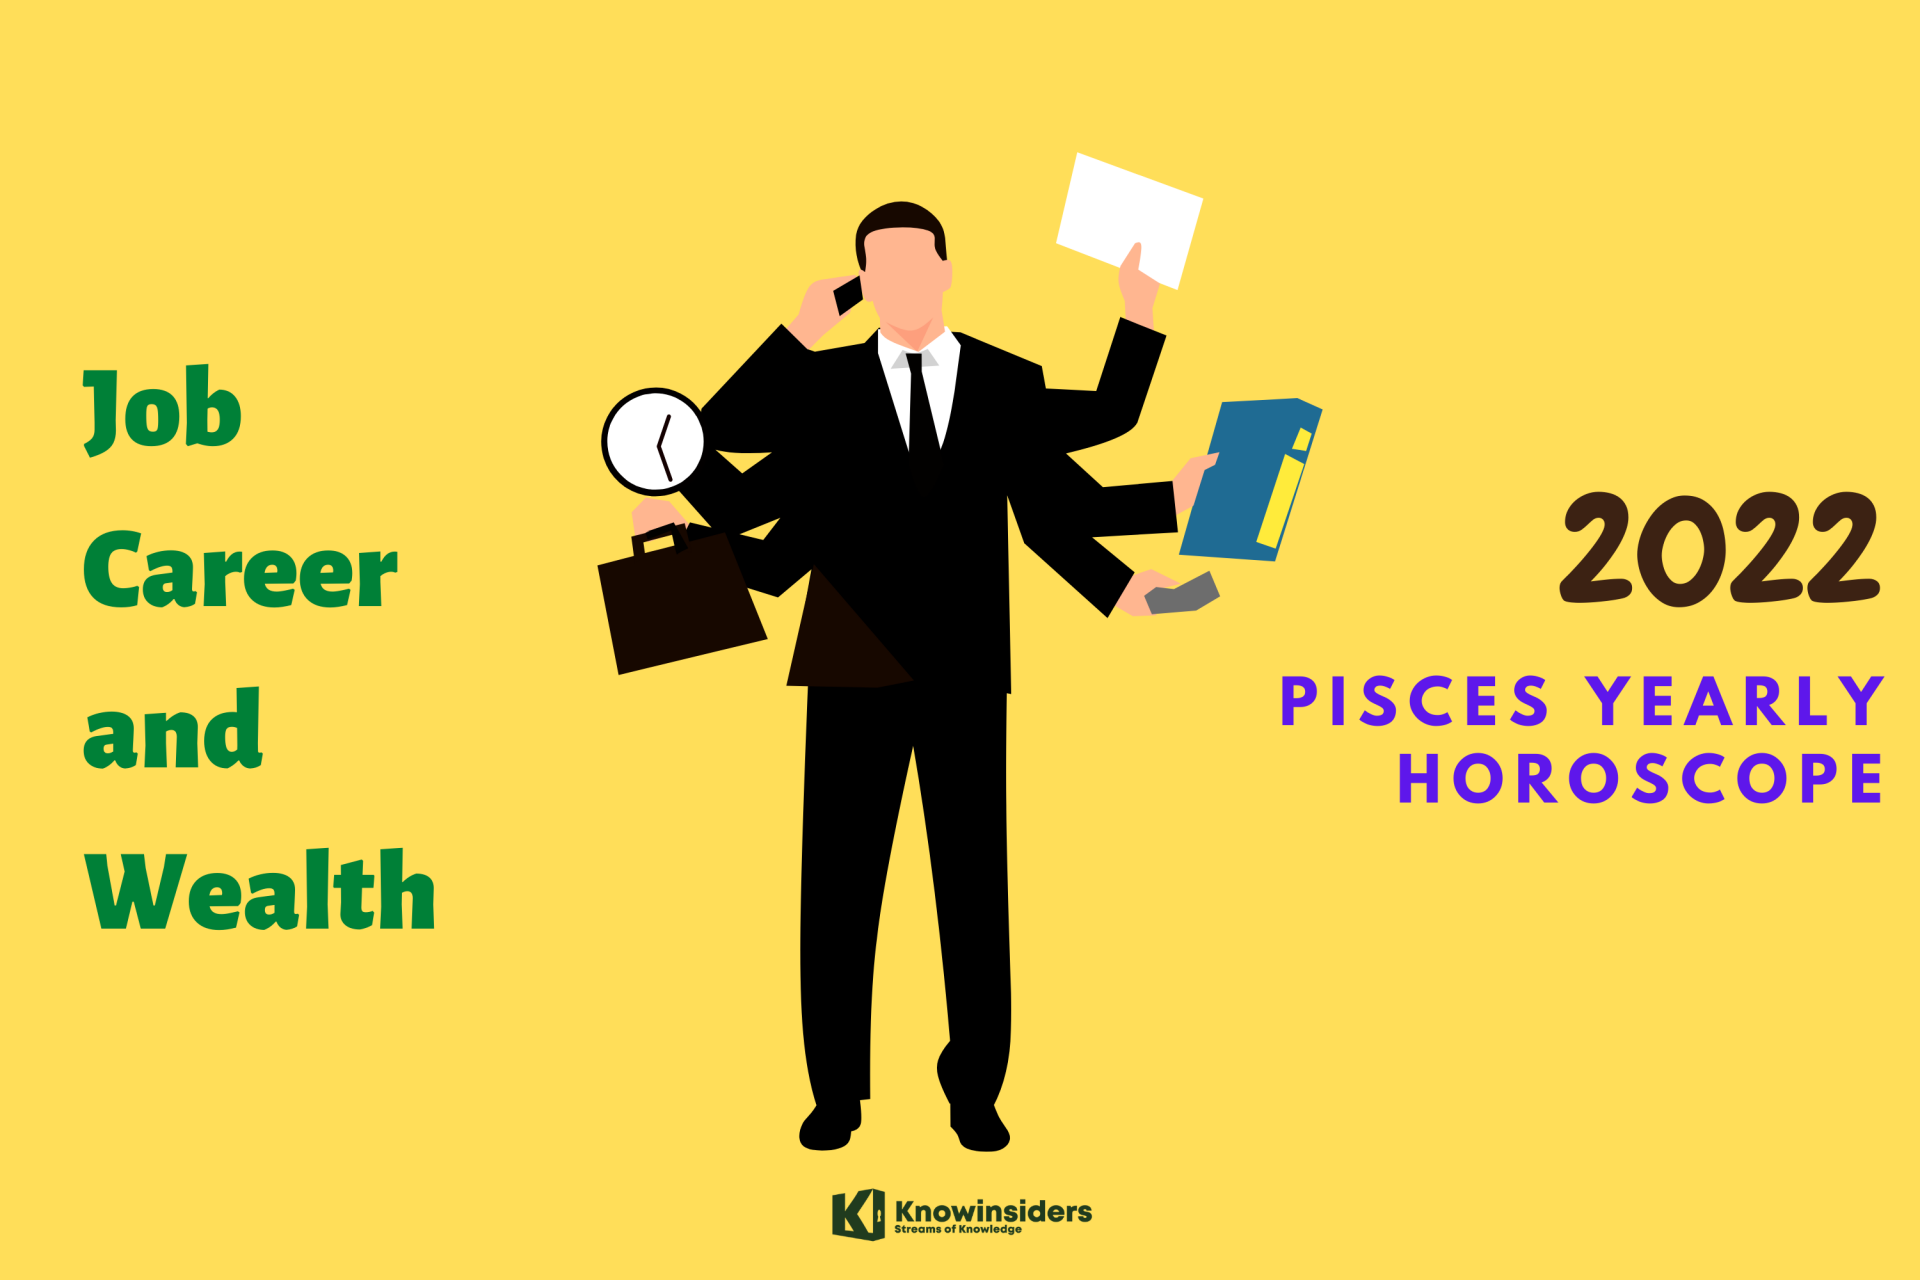 pisces yearly horoscope 2022 predictions for job career and wealth